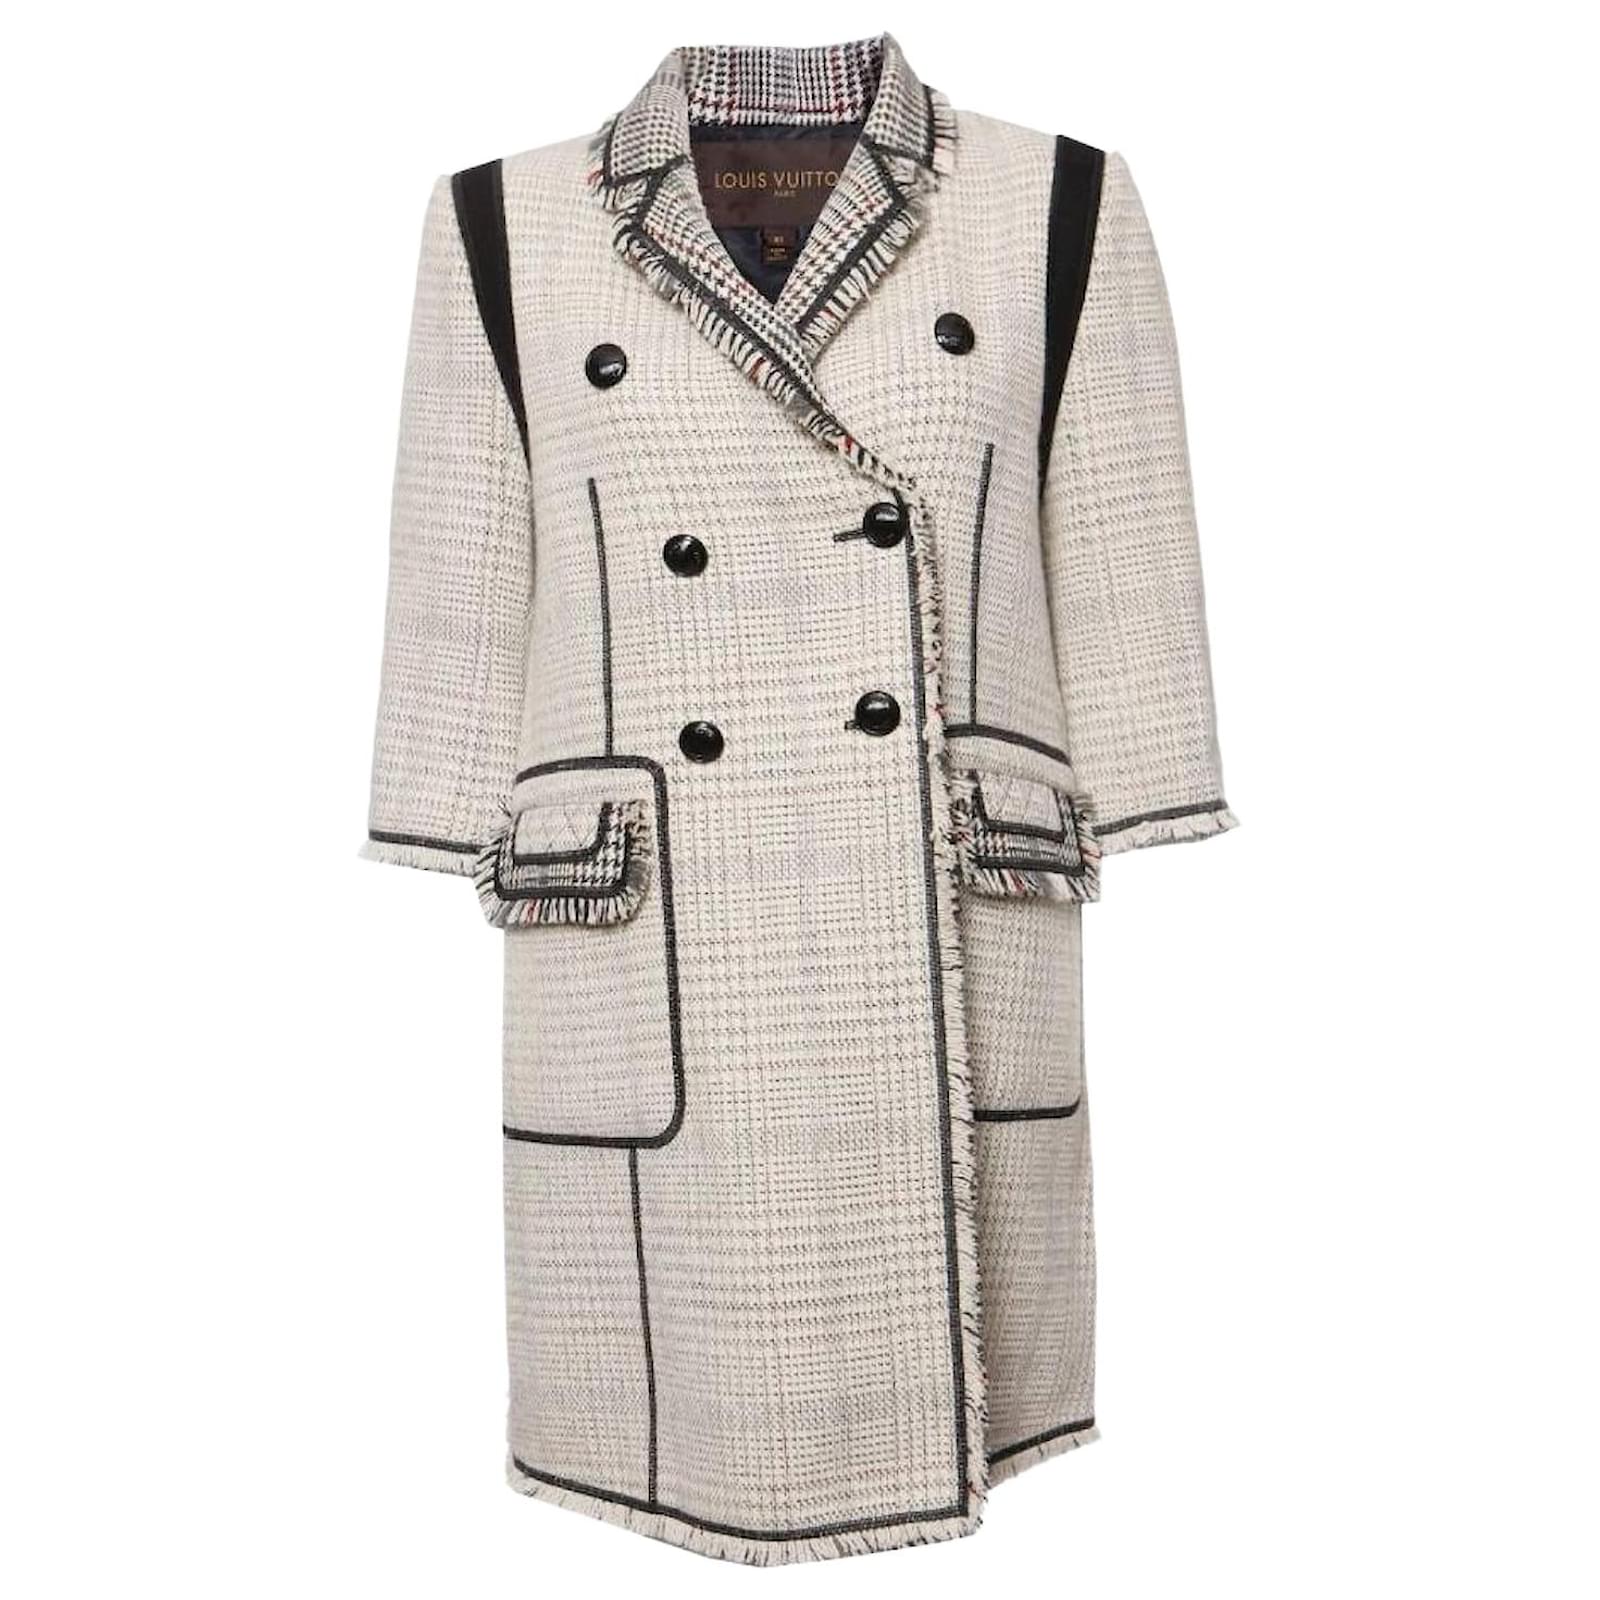 Louis Vuitton, black/white tweed coat with ¾ sleeves in size FR40